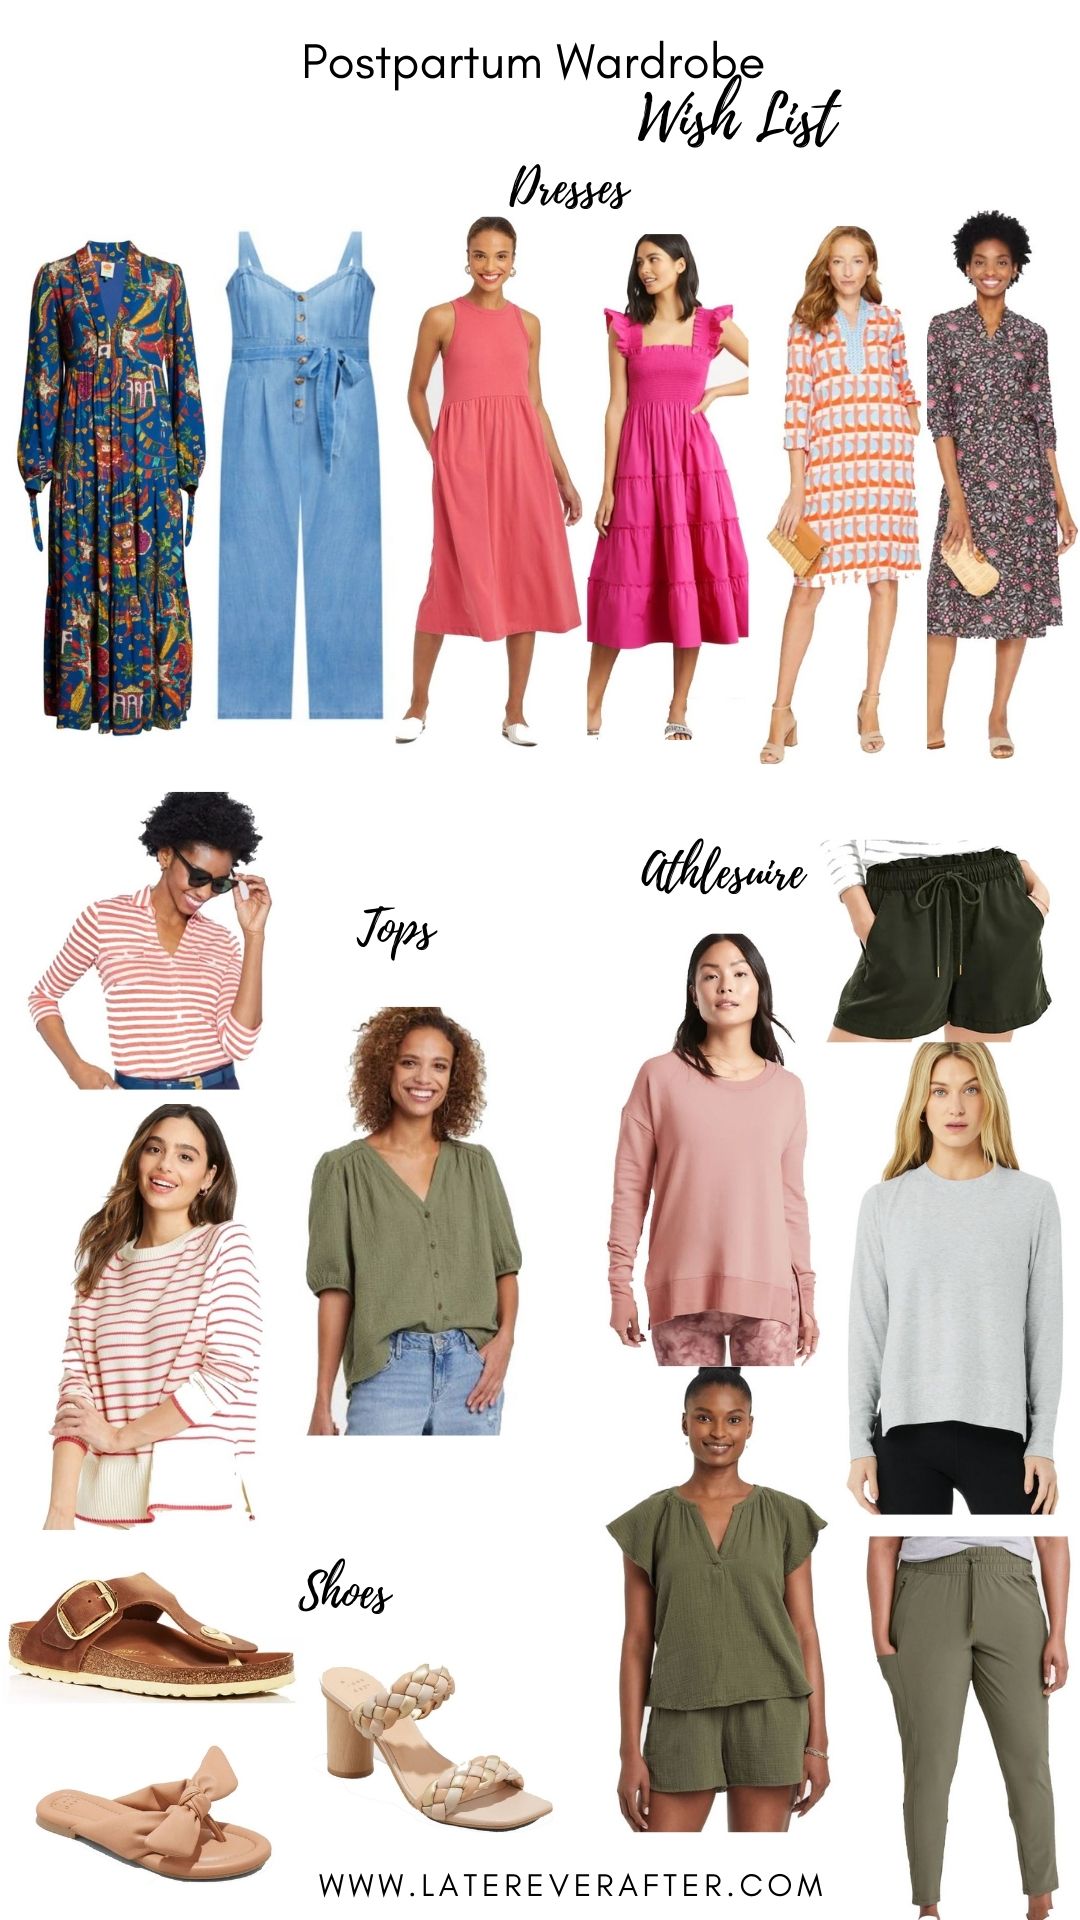 15 Best and Most Comfortable Postpartum Clothes  Post partum outfits,  Postpartum fashion, Clothes